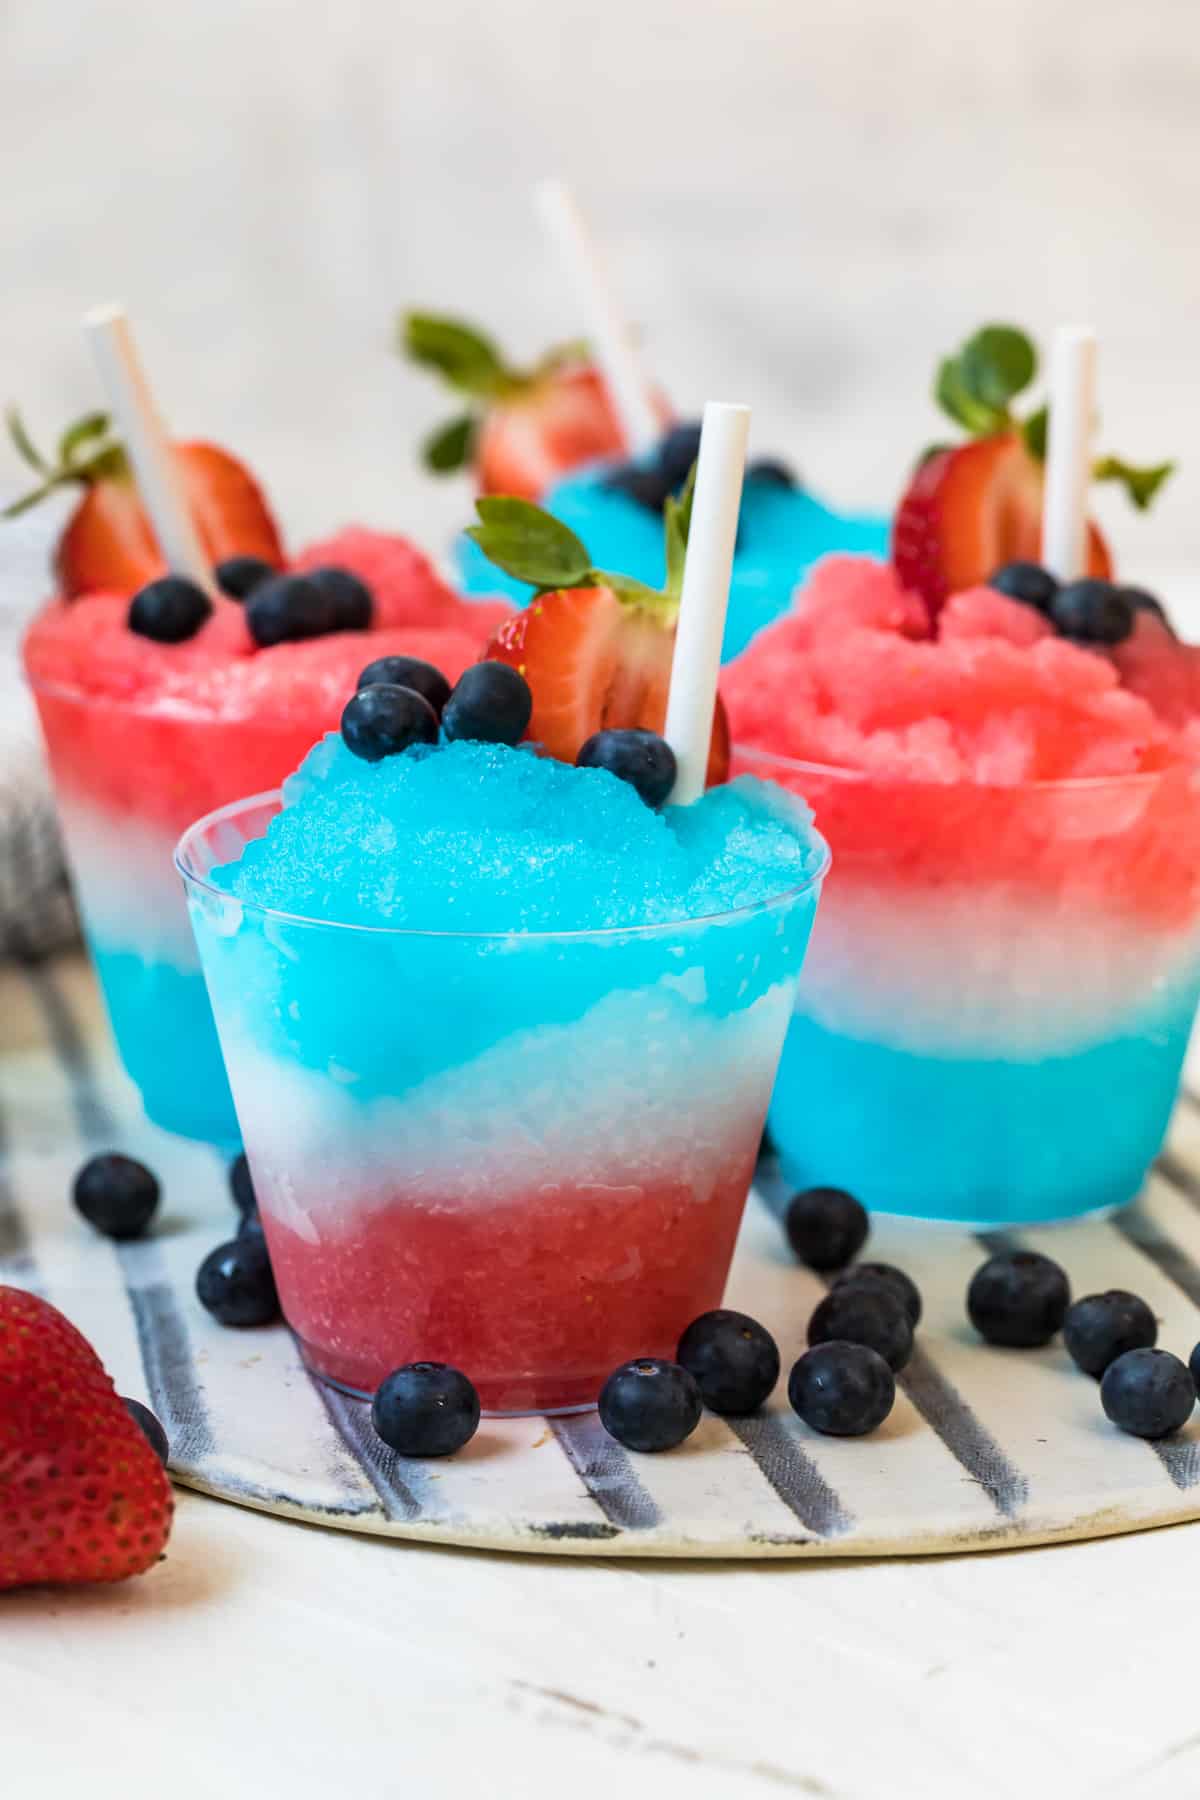 Pictures of slushies